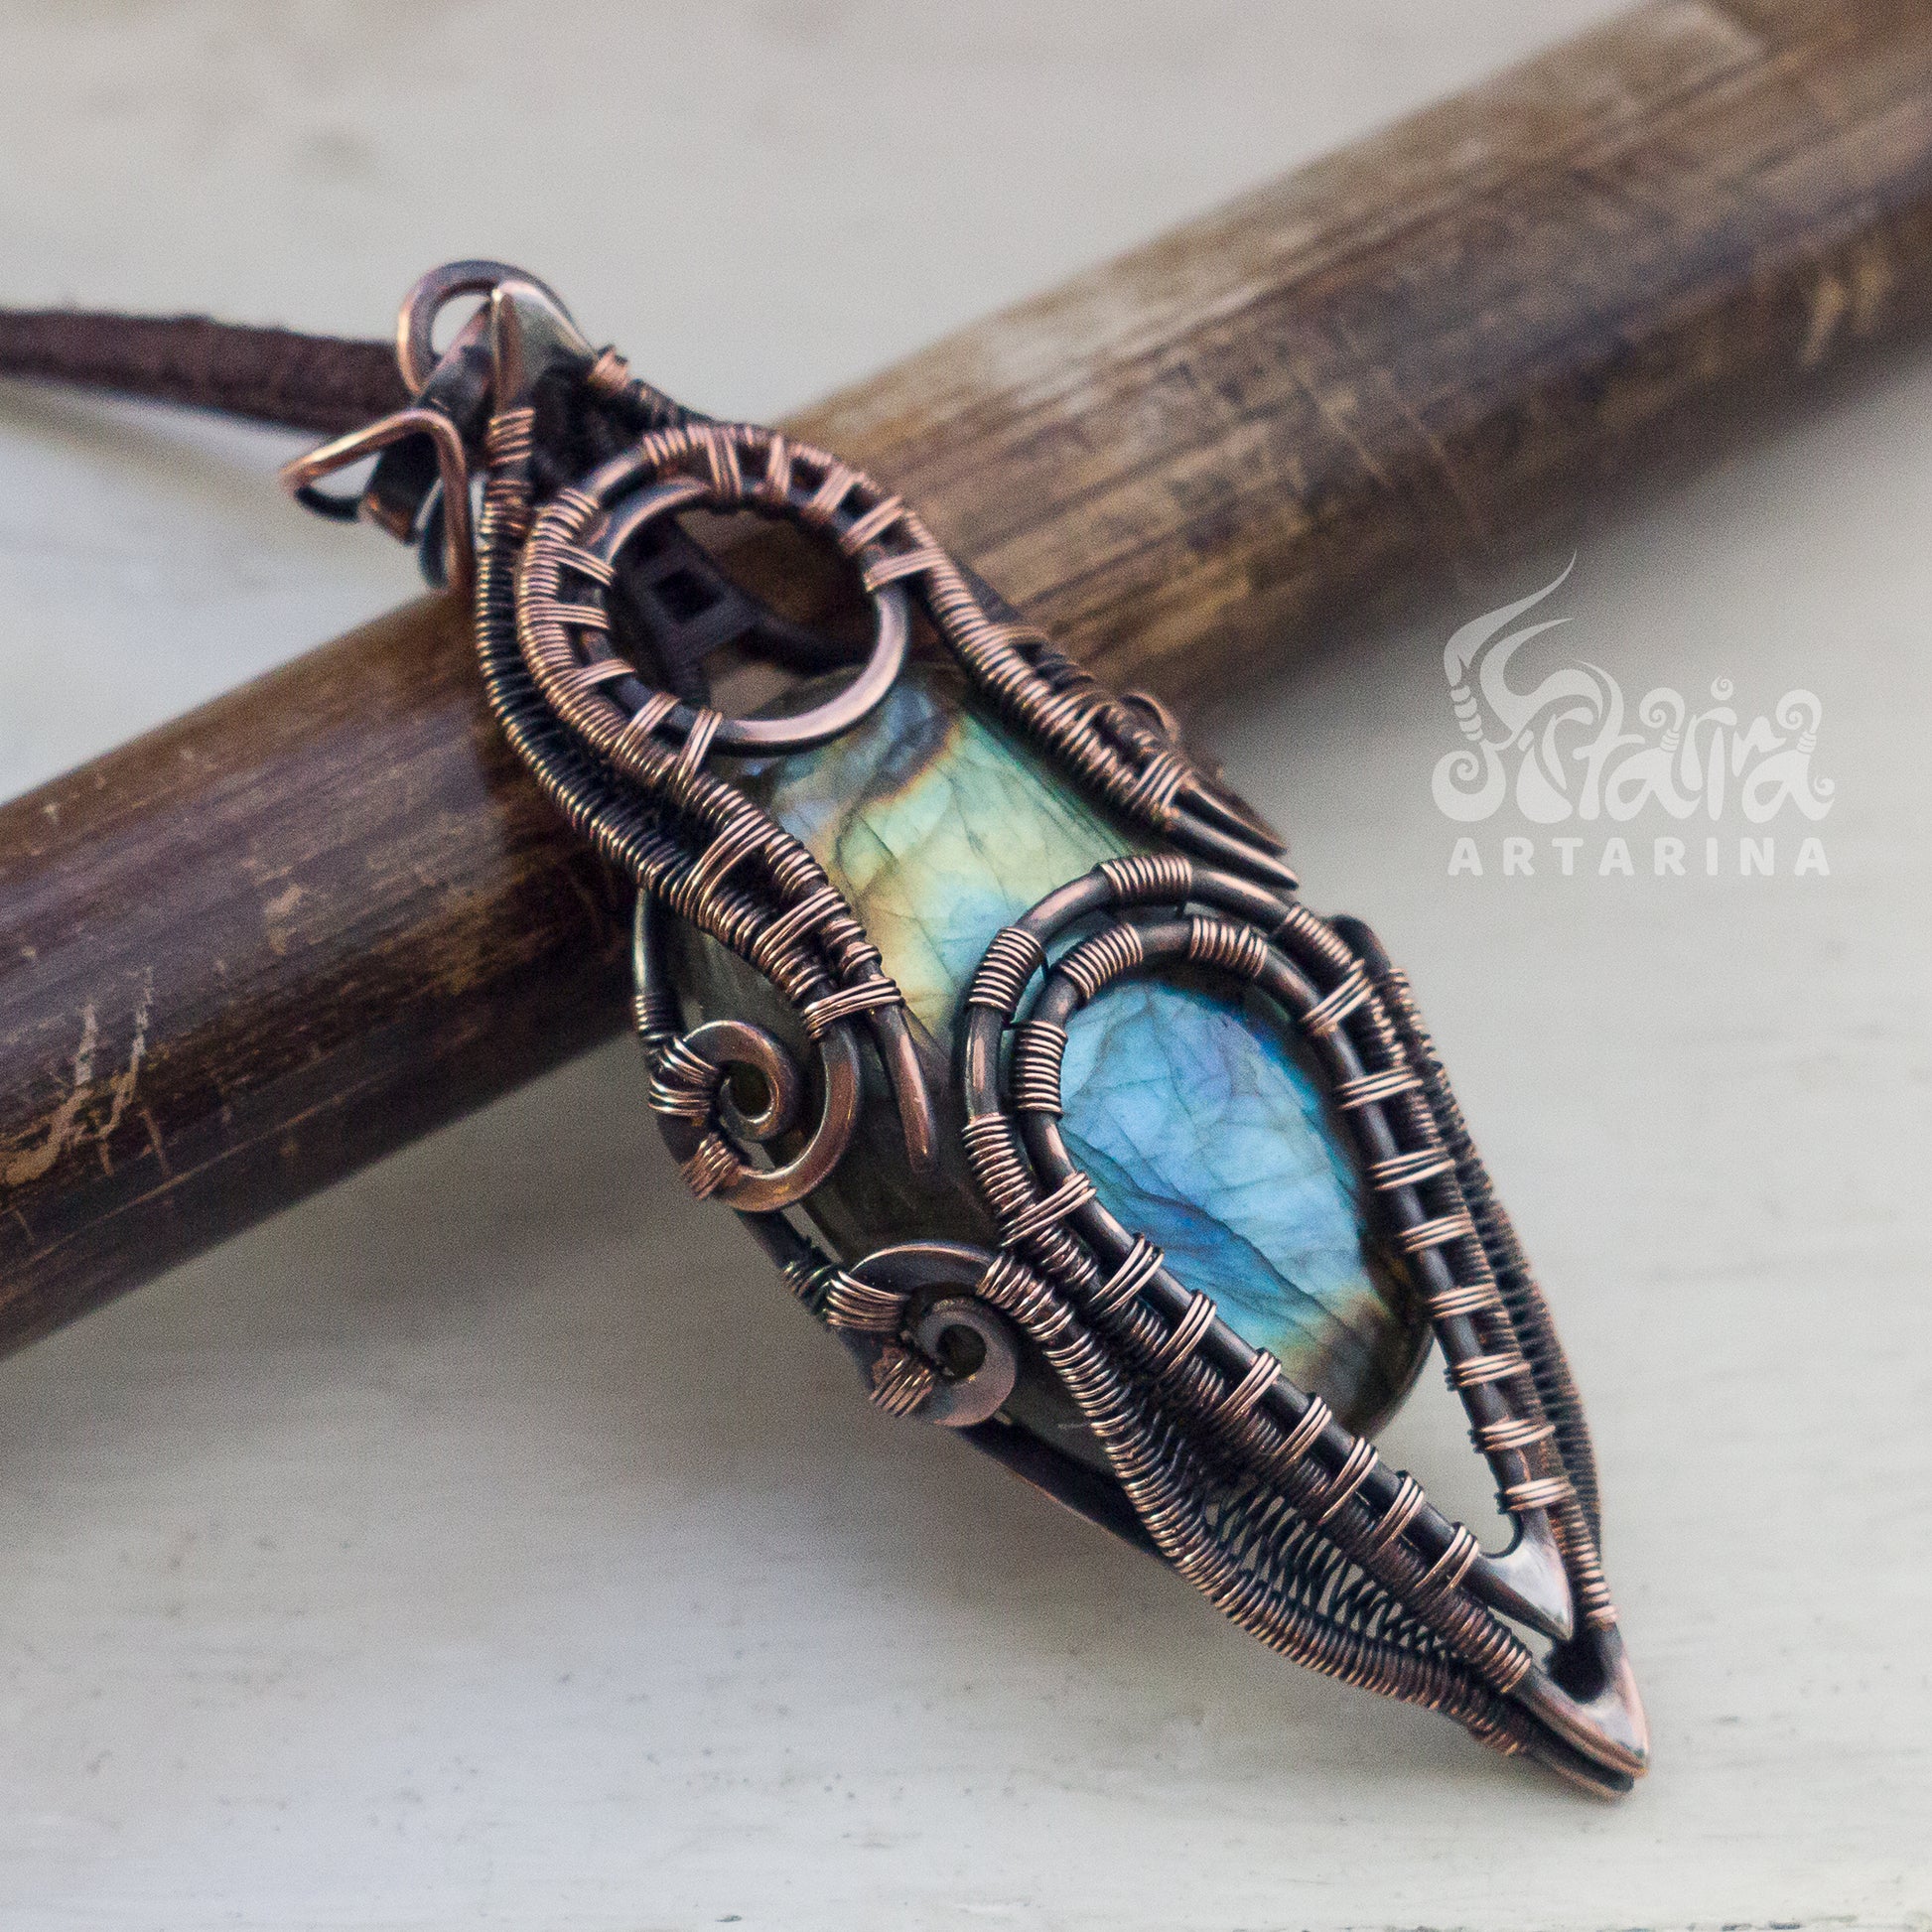 Handmade copper pendant with bright labradorite stone, showcasing full-area iridescence - a bold statement piece for the modern man's distinctive style pic 2